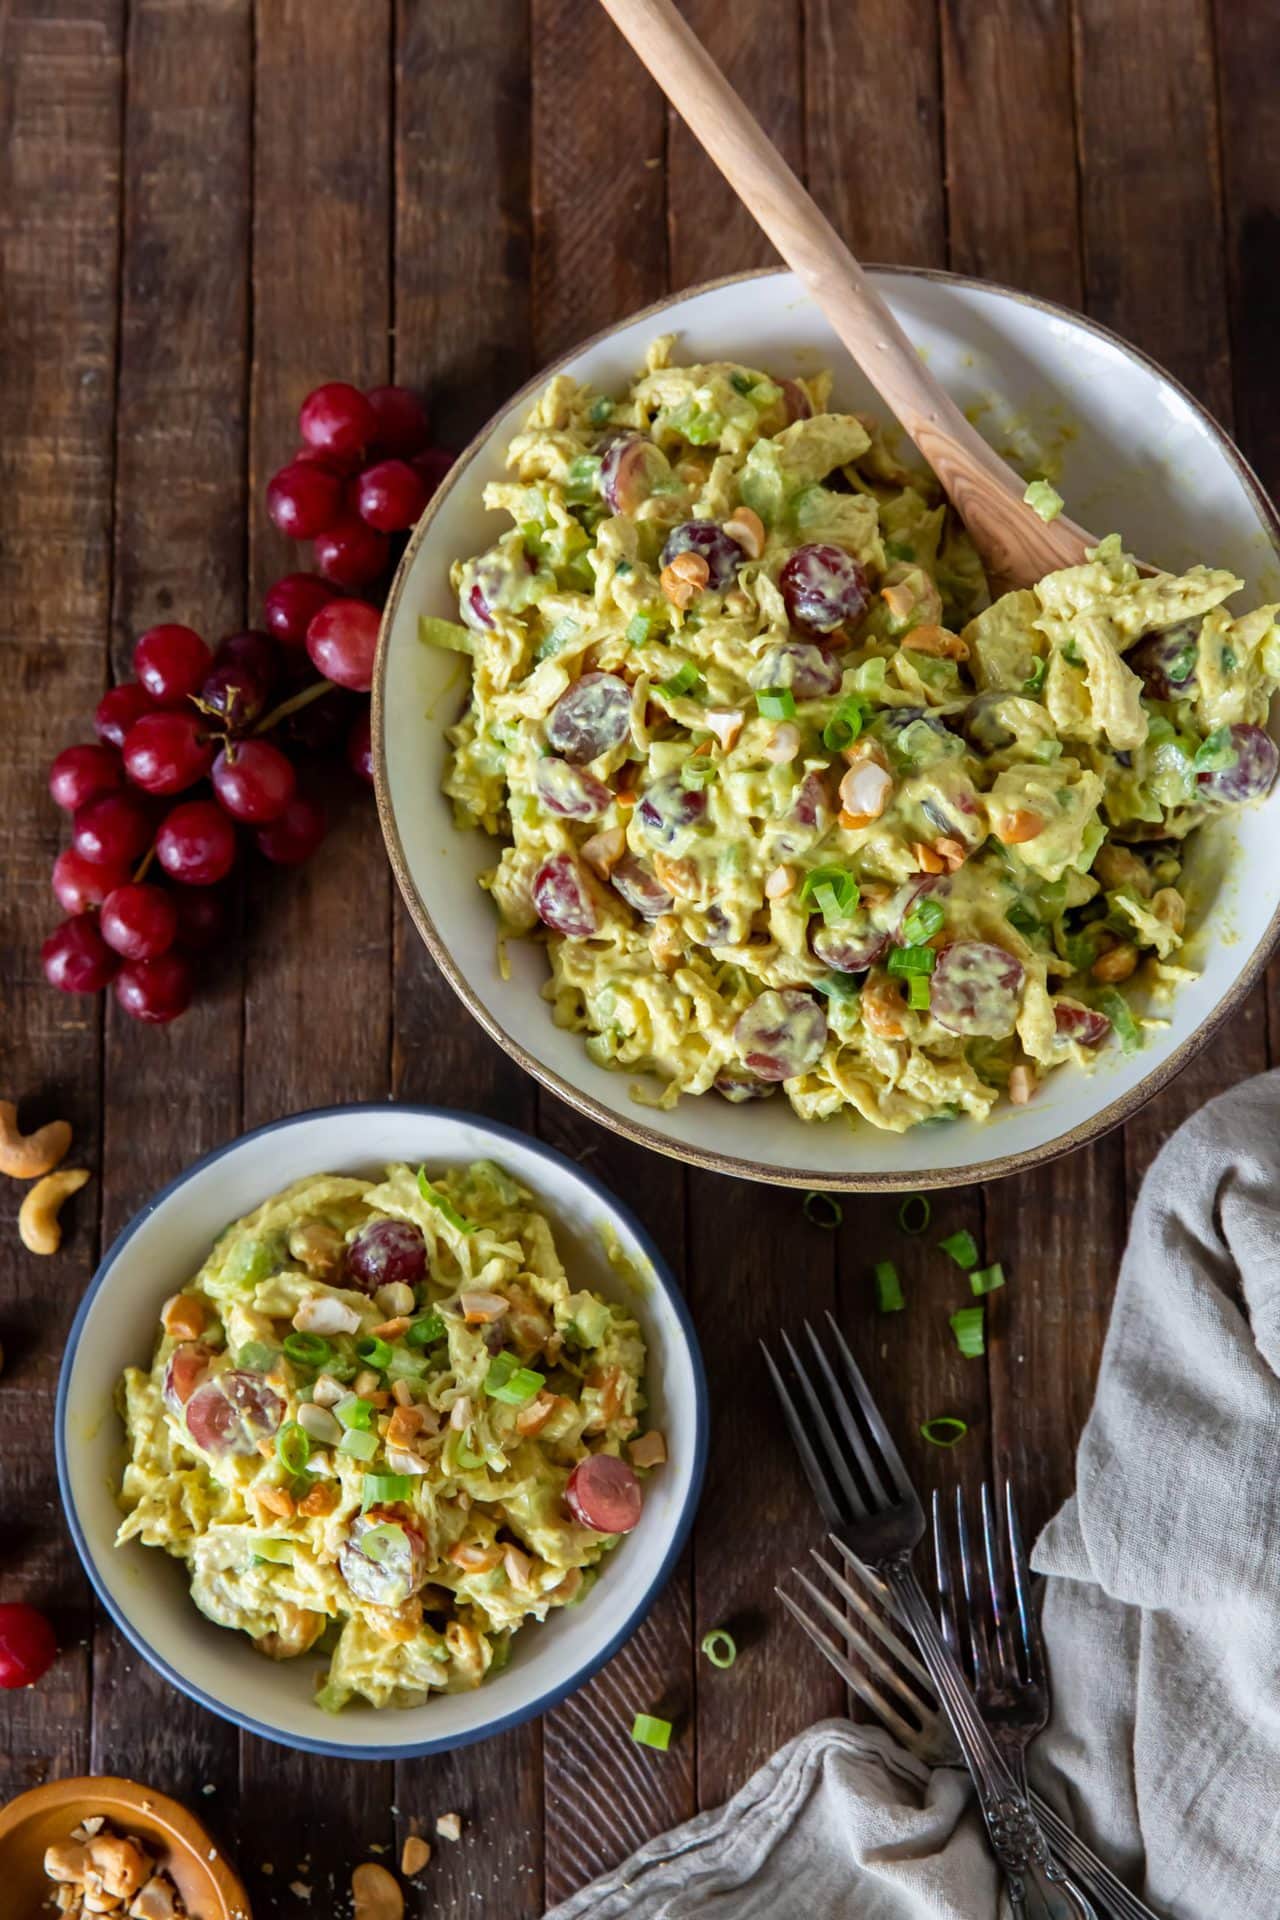 Looking for a recipe for chicken curry salad? This Chicken Curry Salad recipe is a delicious blend of chicken, savory curry powder, sweet grapes, scallions, celery and cashews for a side dish, snack or a great sandwich.